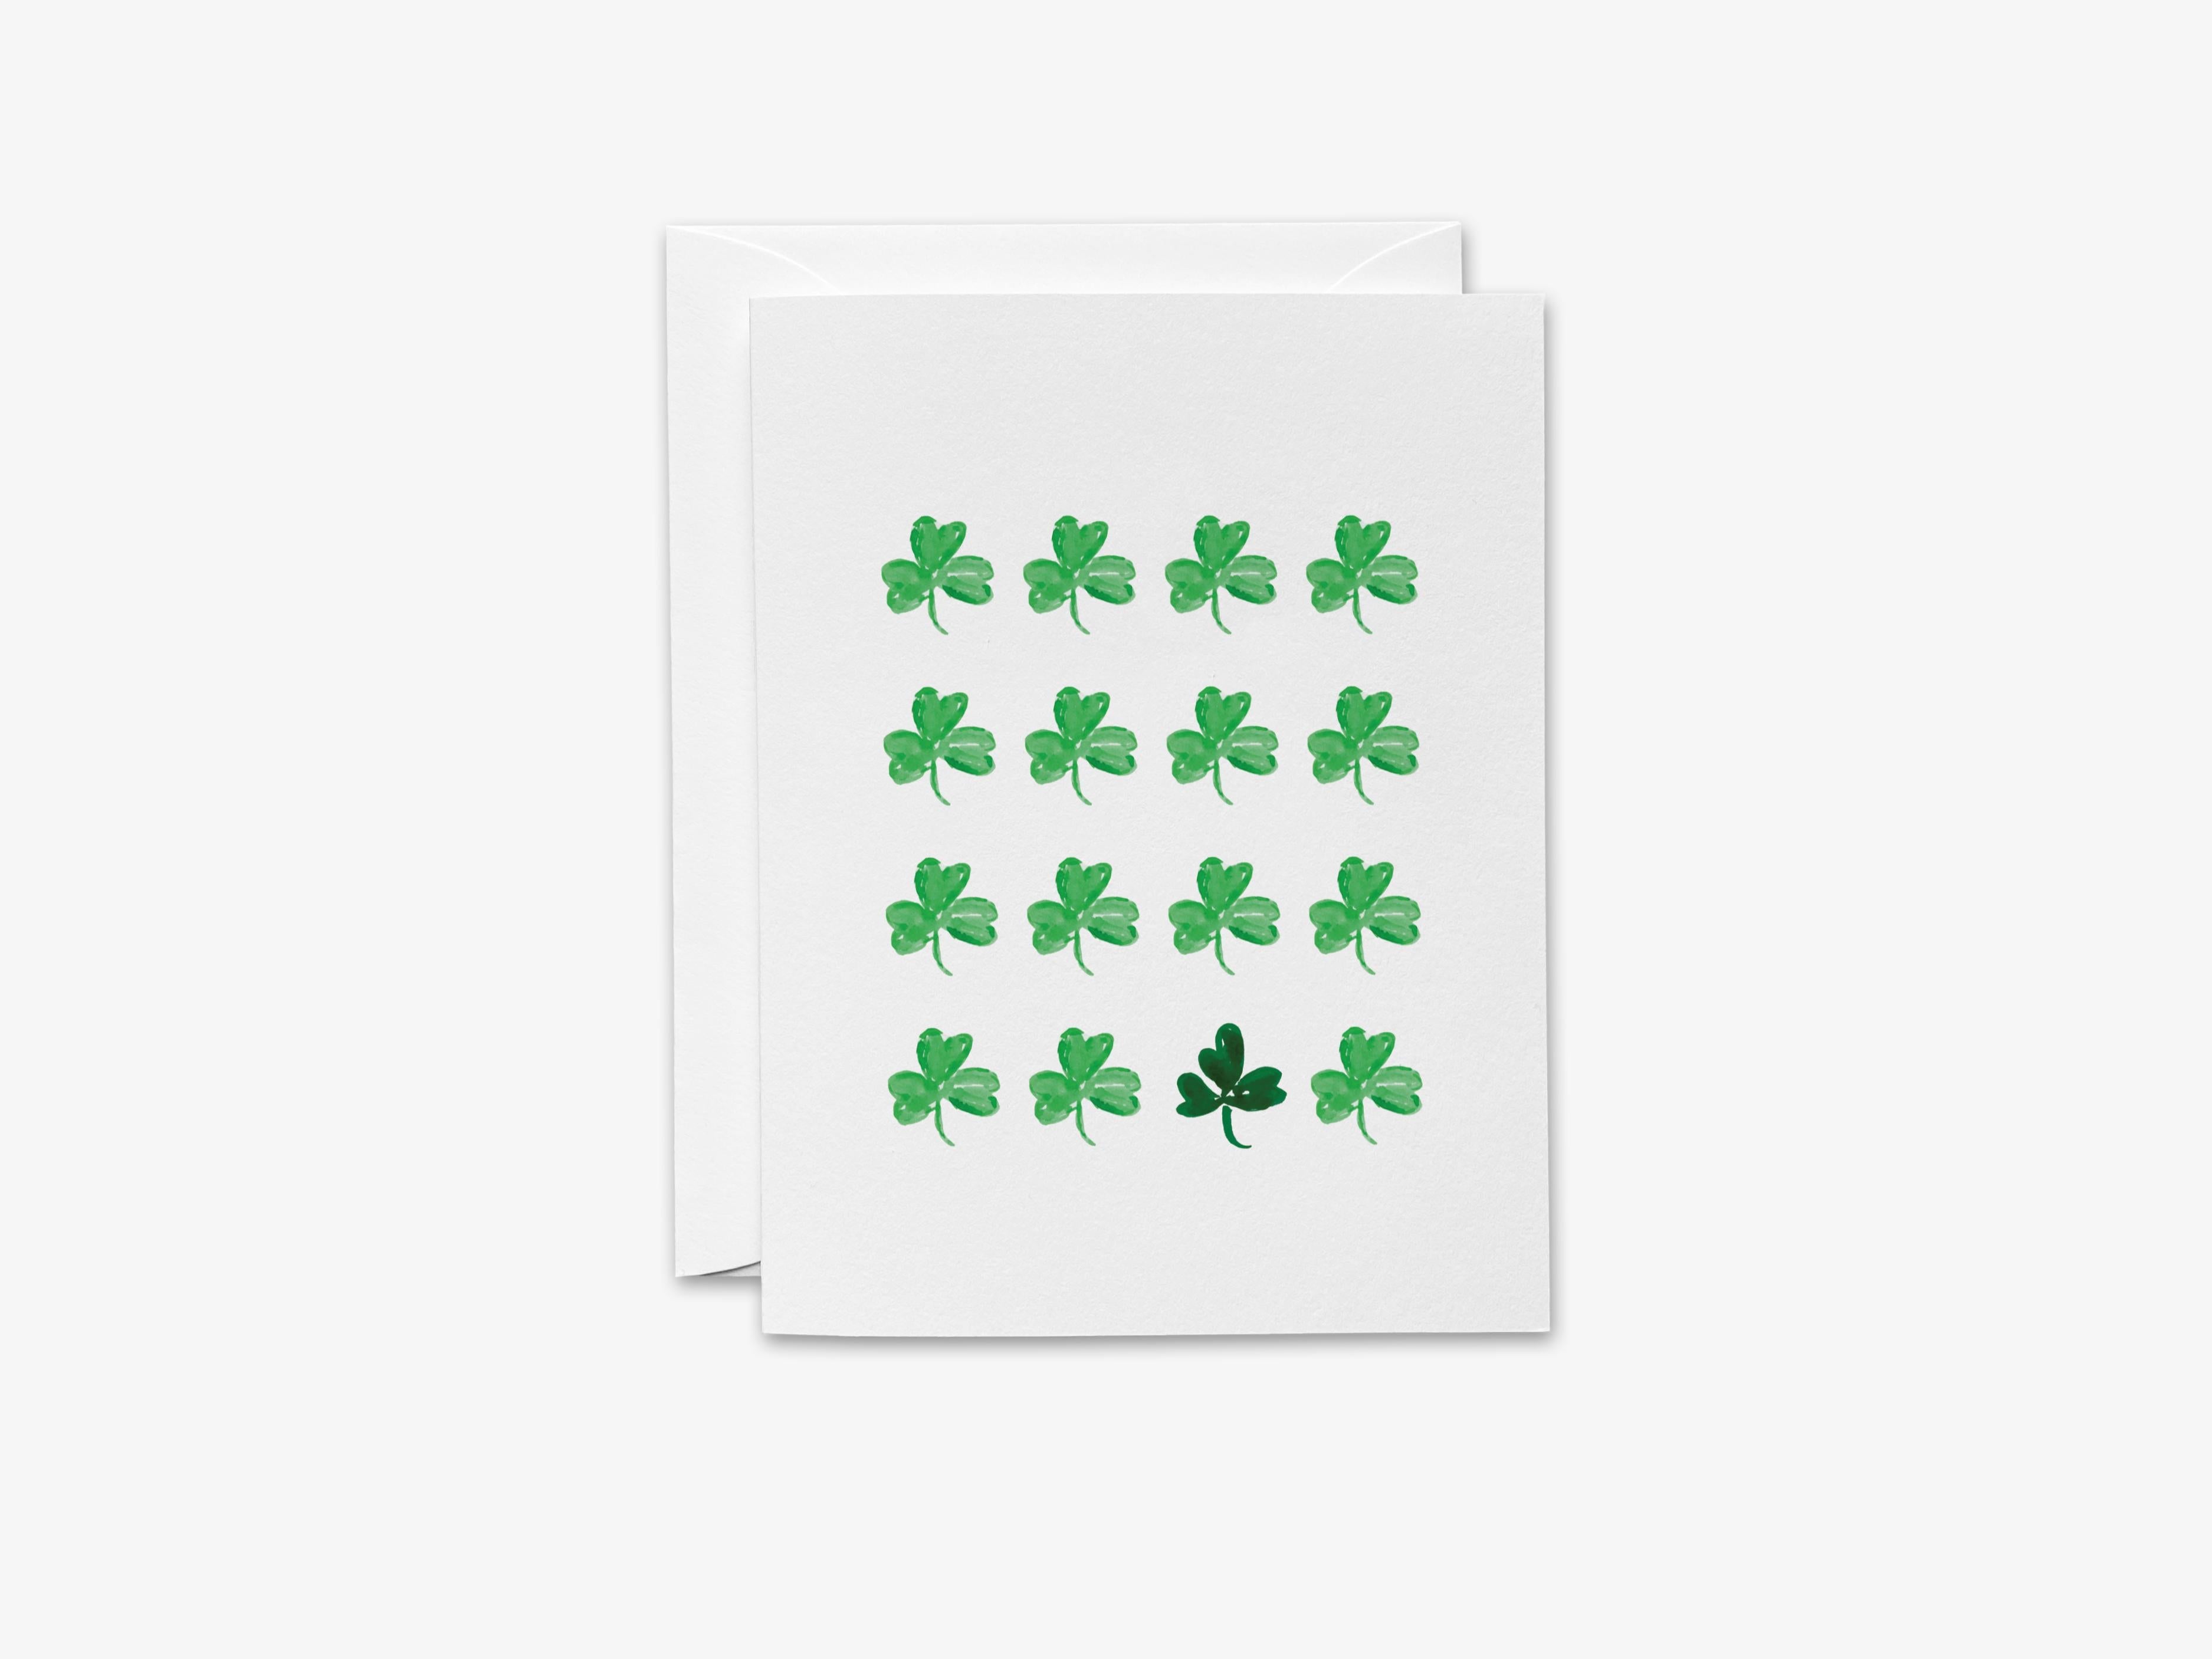 Shamrock Greeting Card-These folded spring cards are 4.25x5.5 and feature our hand-painted watercolor three leaf clovers, printed in the USA on 100lb textured stock. They come with a White envelope and make a lovely card to say thank you or just because to your friends. -The Singing Little Bird